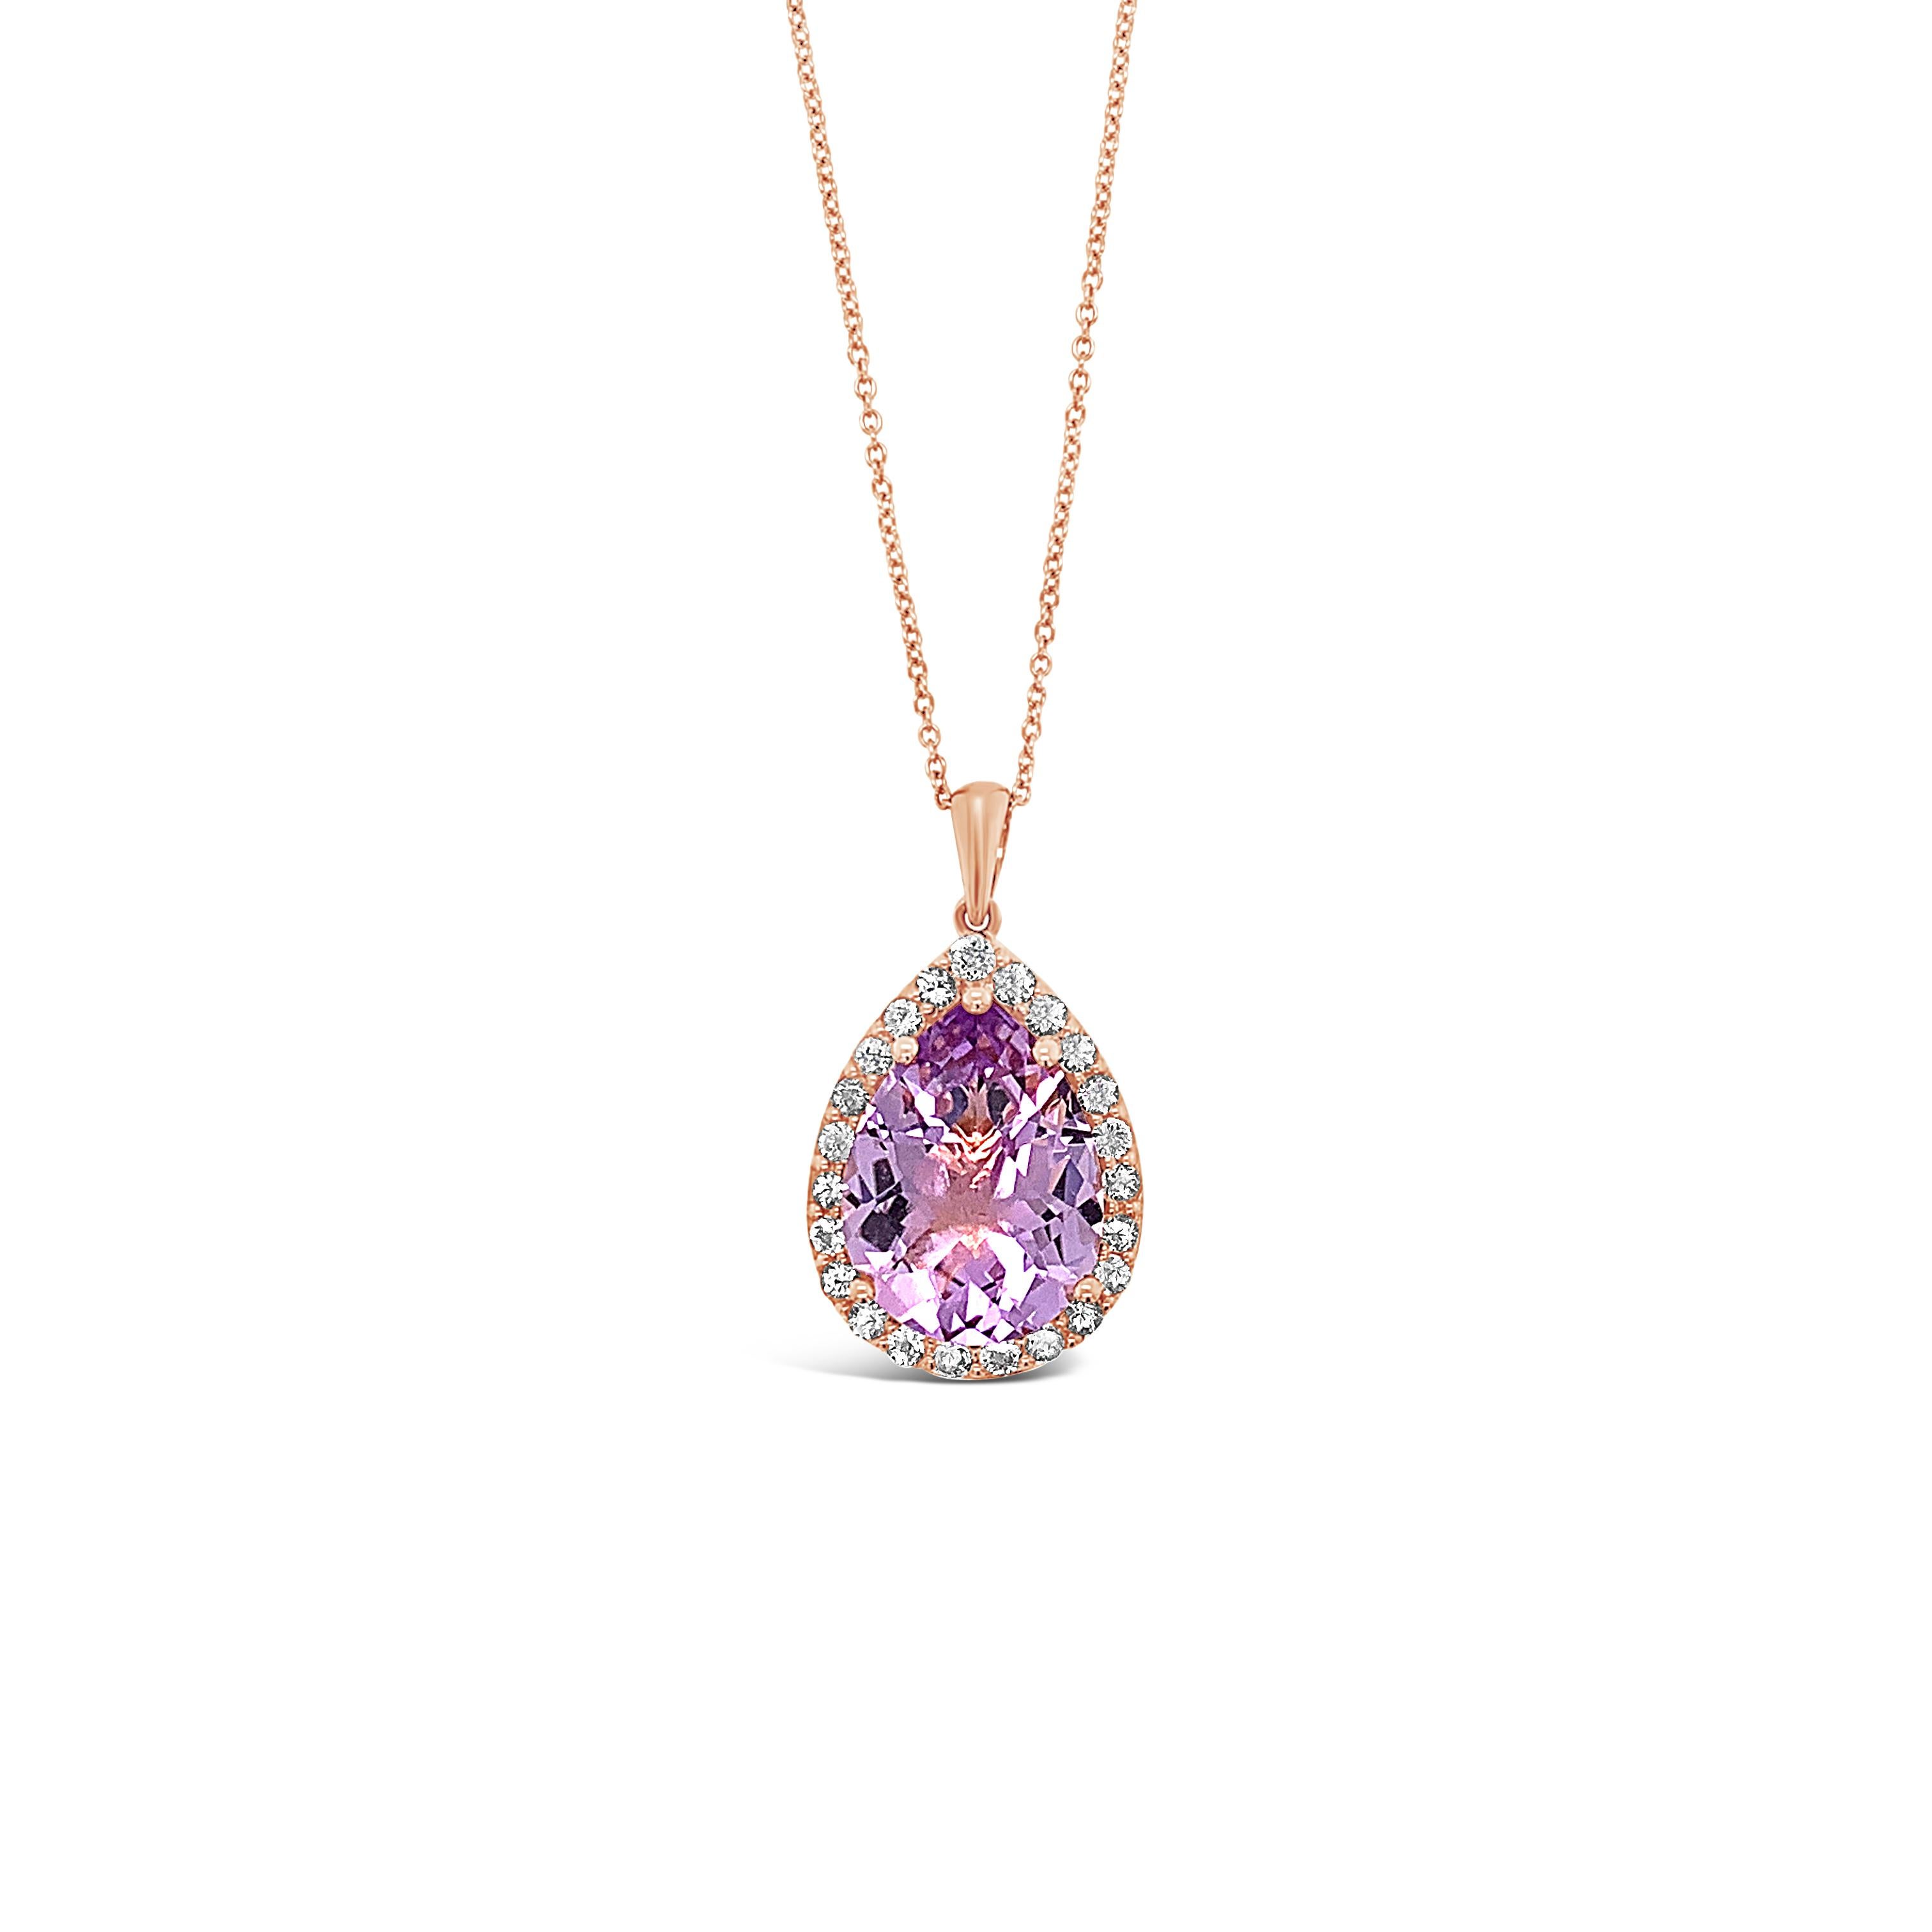 Roberto Ricci® Pendant featuring 6 3/4 cts. Cotton Candy Amethyst®, 7/8 cts. White Sapphire, set in 14K Strawberry Gold®. Please feel free to reach out with any questions! Item comes with a suede pouch!
